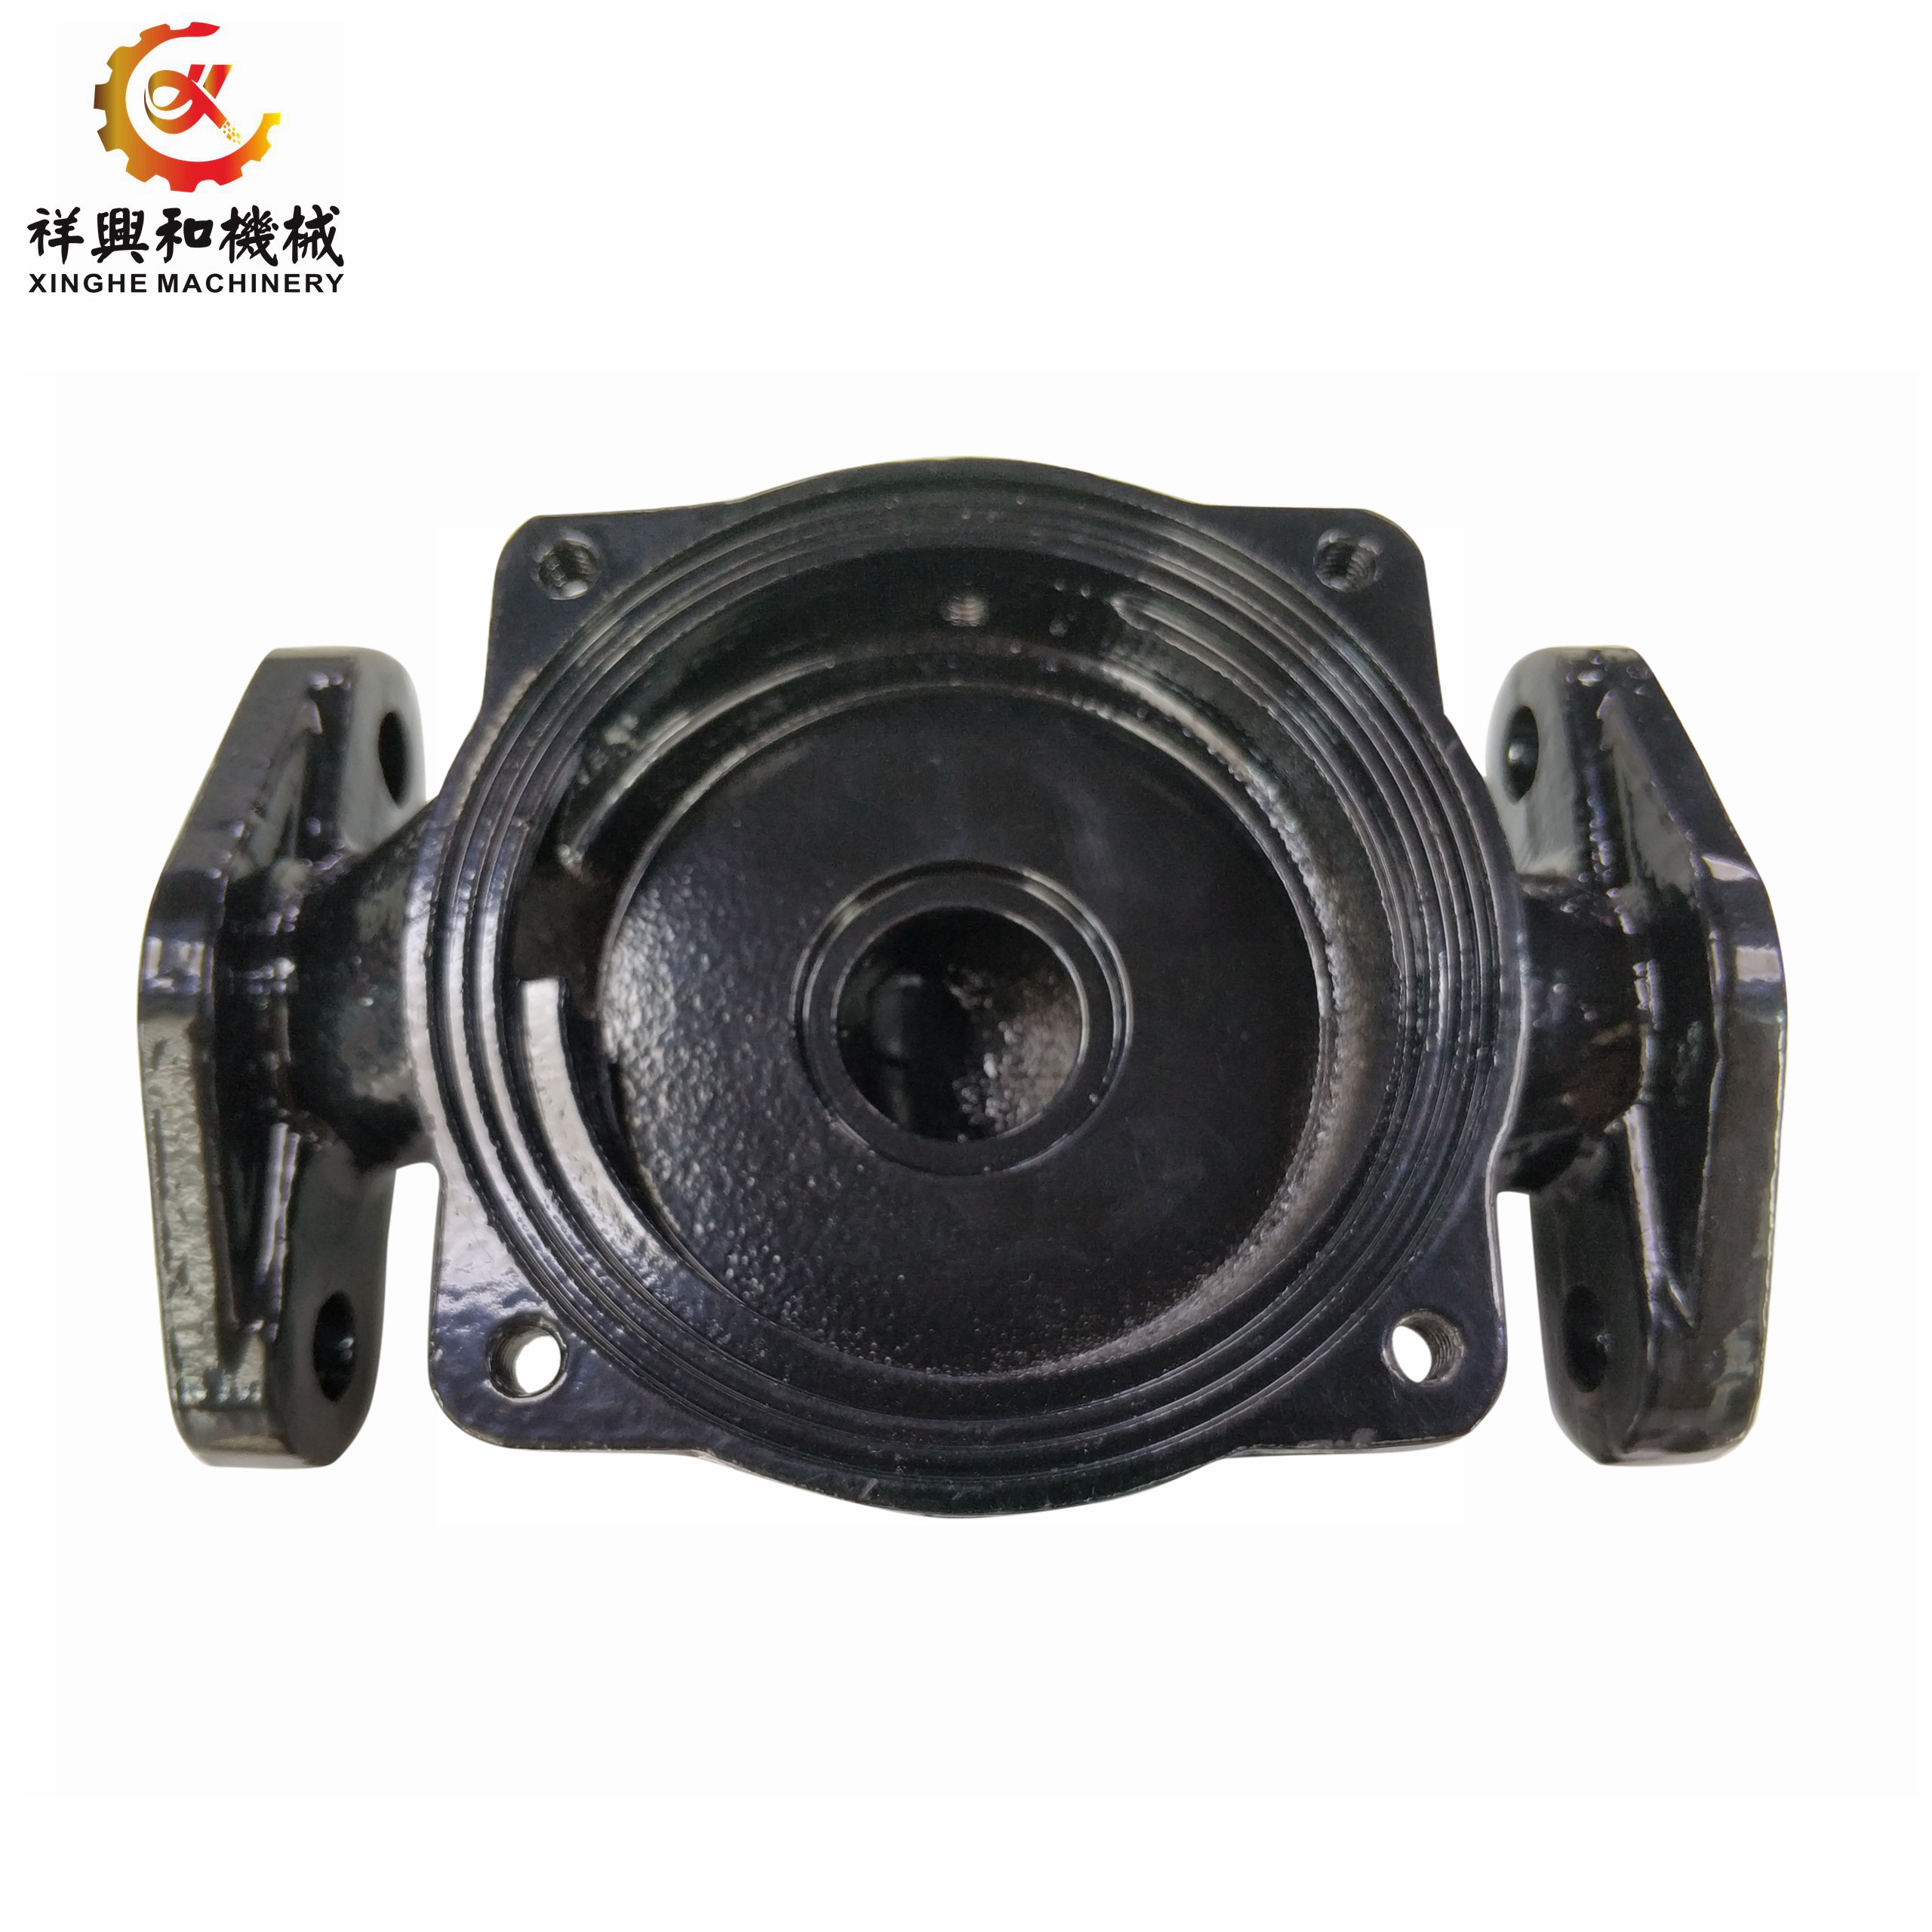 Iron precoated shell casting pump and flange